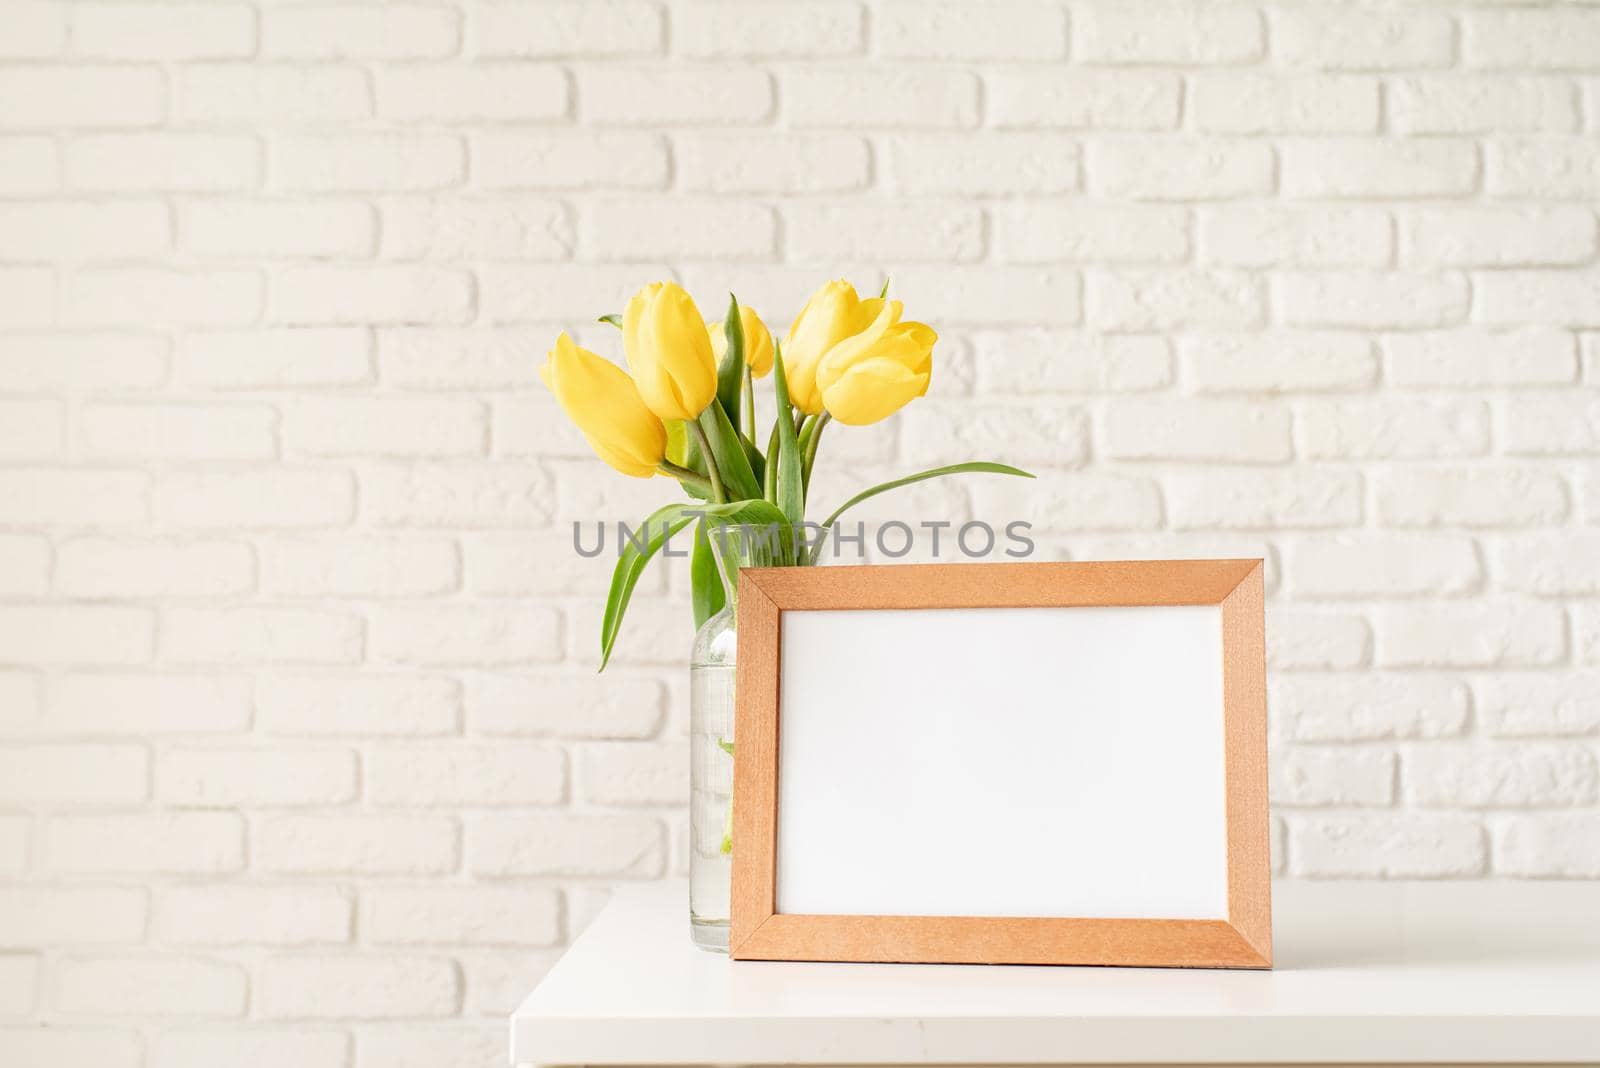 yellow tulips in a glass vase and blank photo frame on a white brick wall background by Desperada